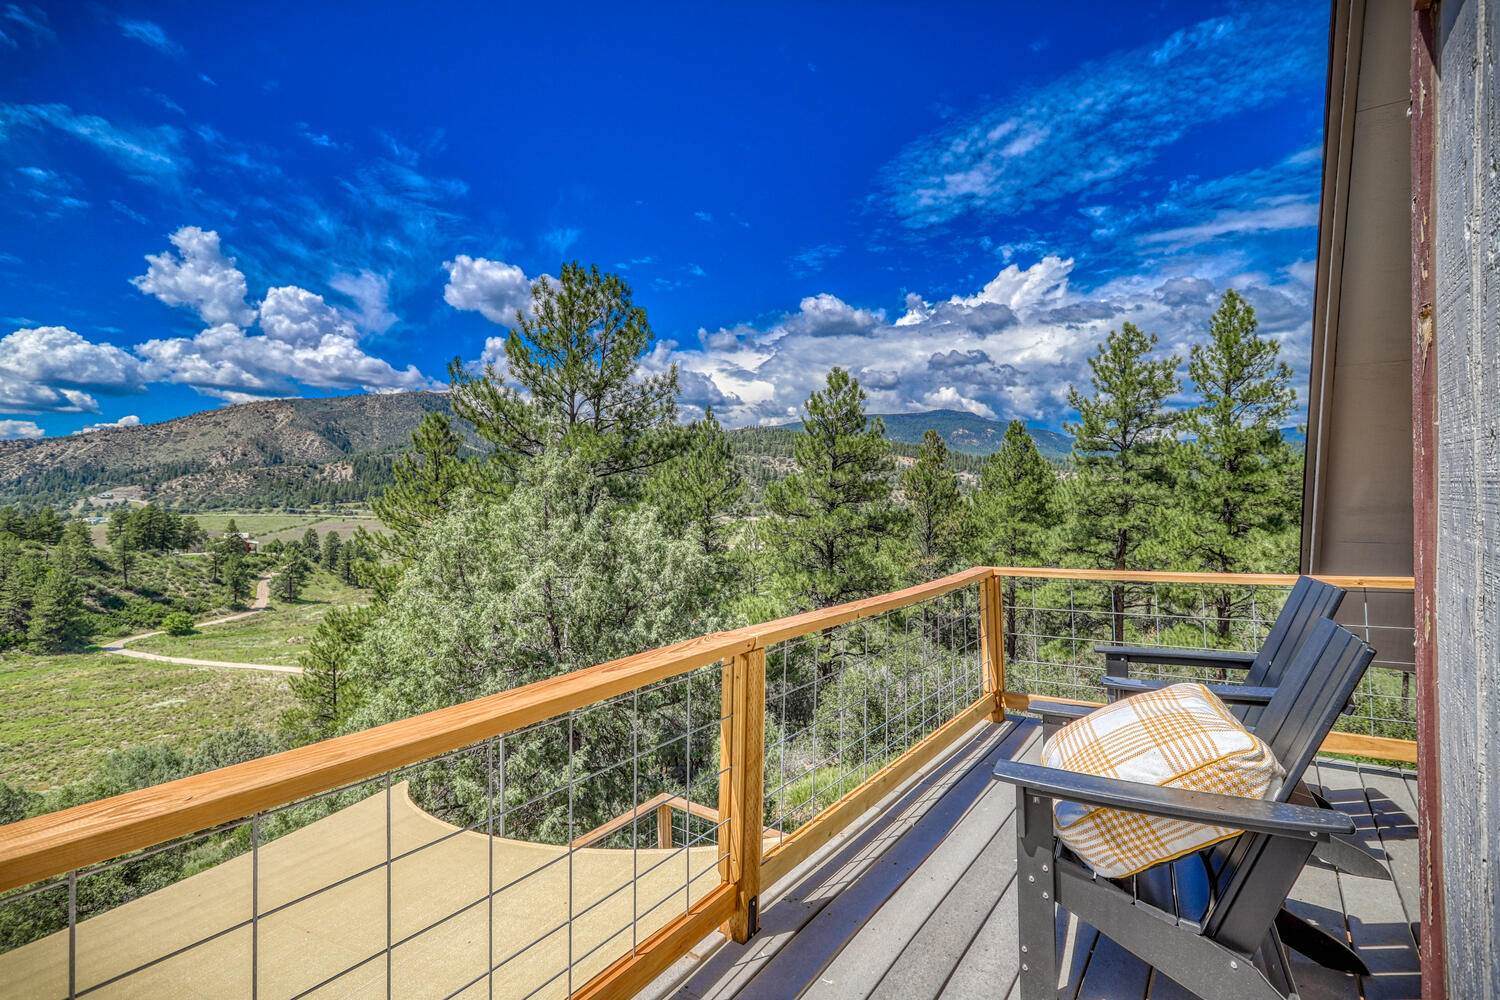 Chimney Rock Retreat, #1563 County Road 700 - ST, Pagosa Springs, CO 81147